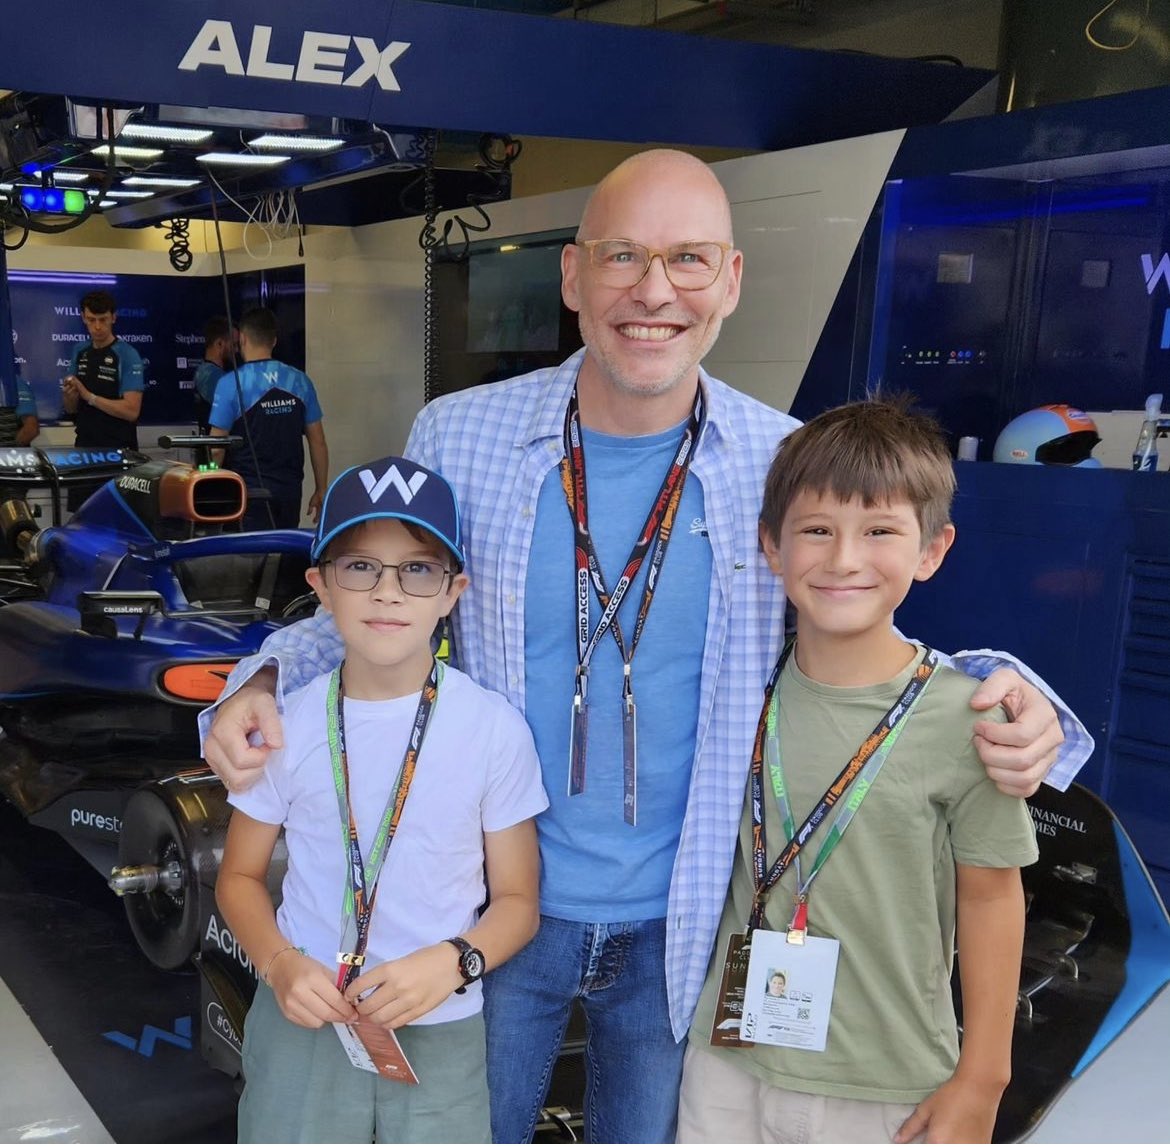 Jacques Villeneuve back at home with @WilliamsRacing this weekend in Italy. JV’s best result at Monza with Williams was a P5 finish in 1997. #F1 #ItalianGP